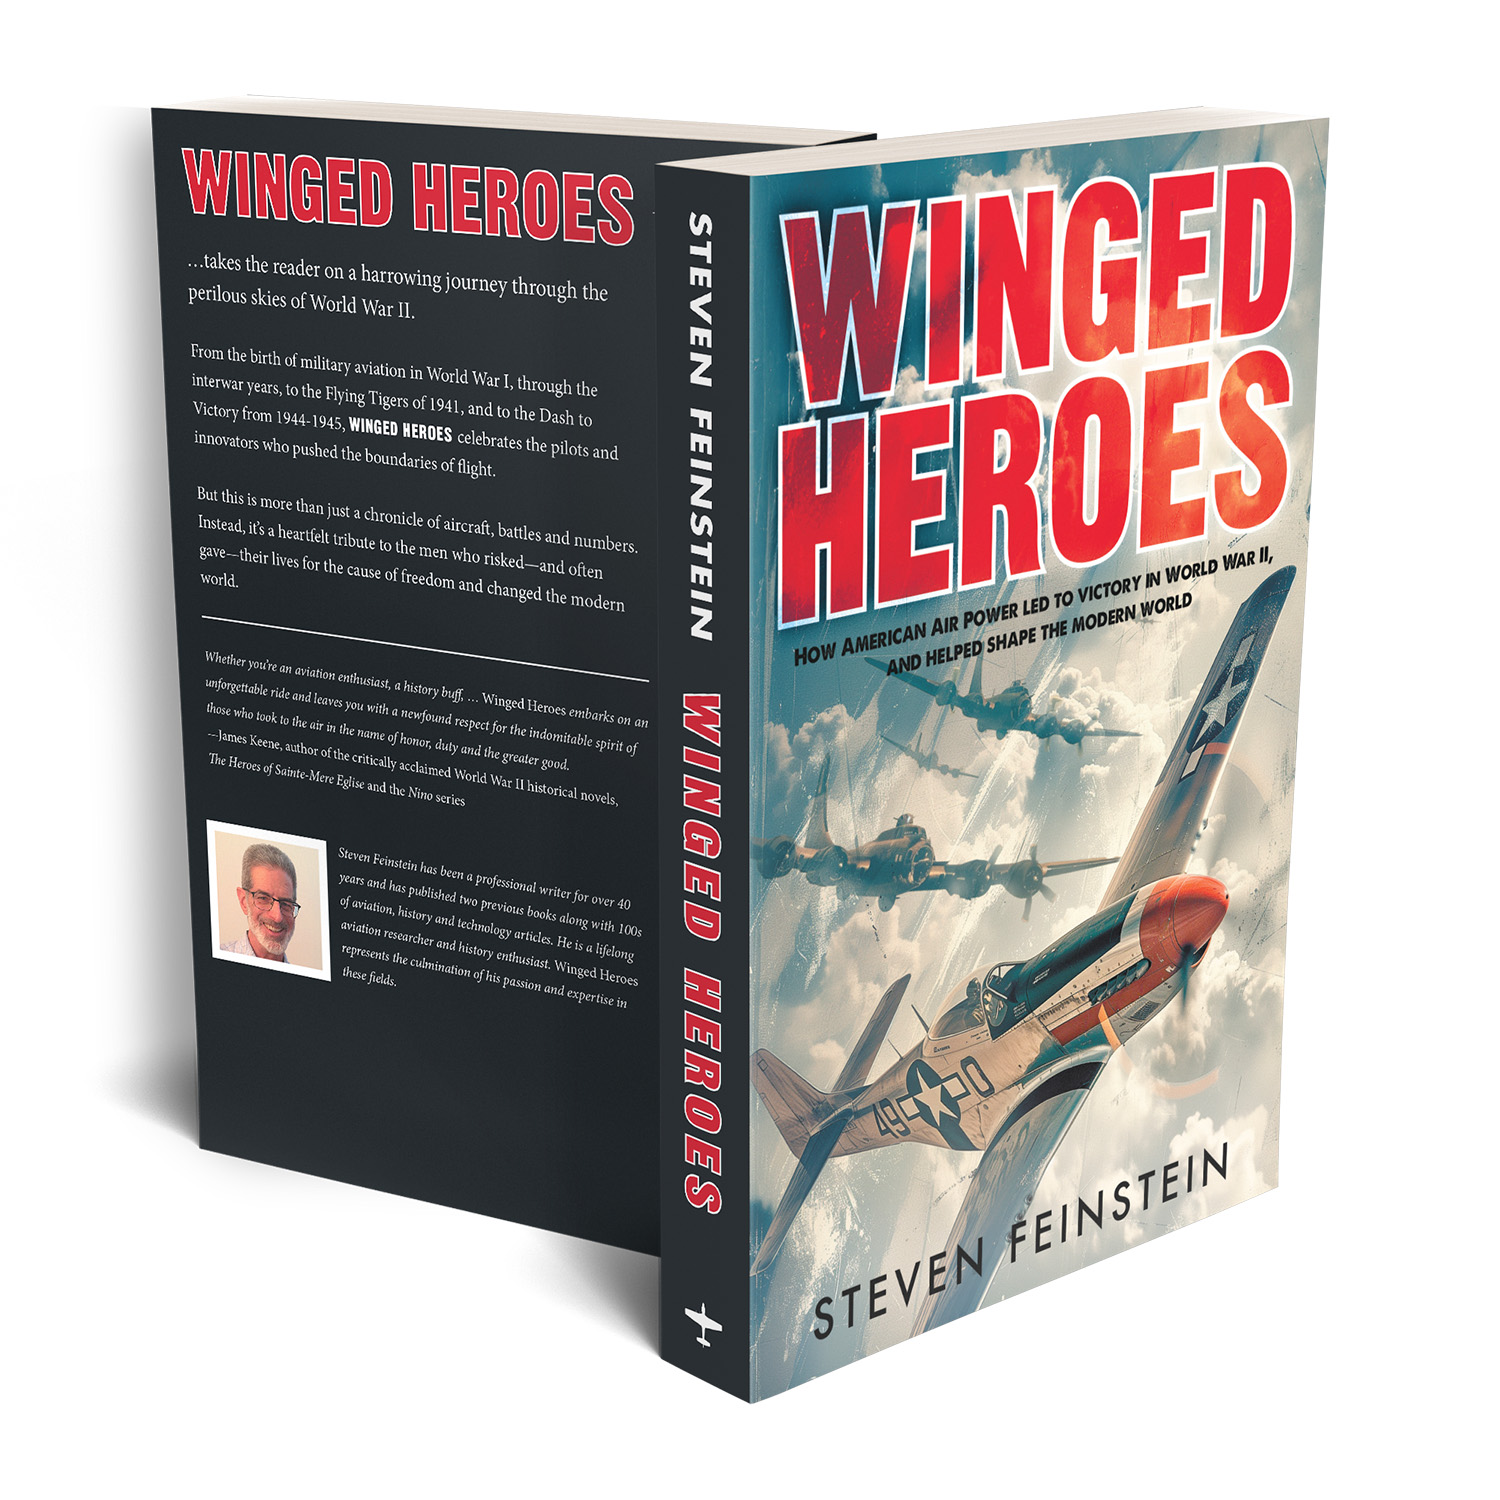 'Winged Heroes' is a detailed exploration of US airpower in WW2. The author is Steve Feinstein. The cover design and interior formatting are by Mark Thomas of coverness.com. To find out more about my book design services, please visit www.coverness.com.